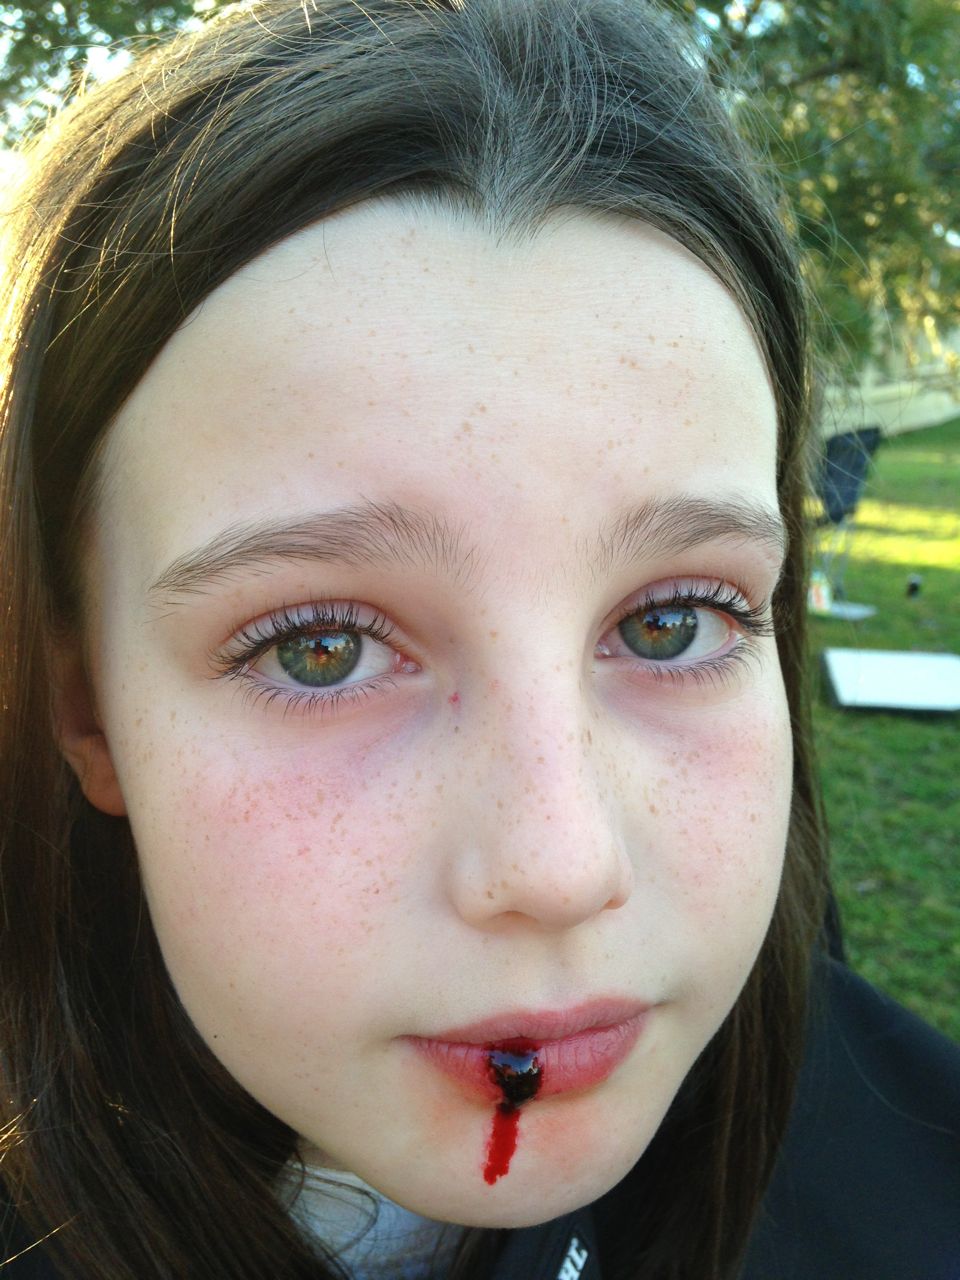 On set of Jackrabbit after her character has been struck by her father.